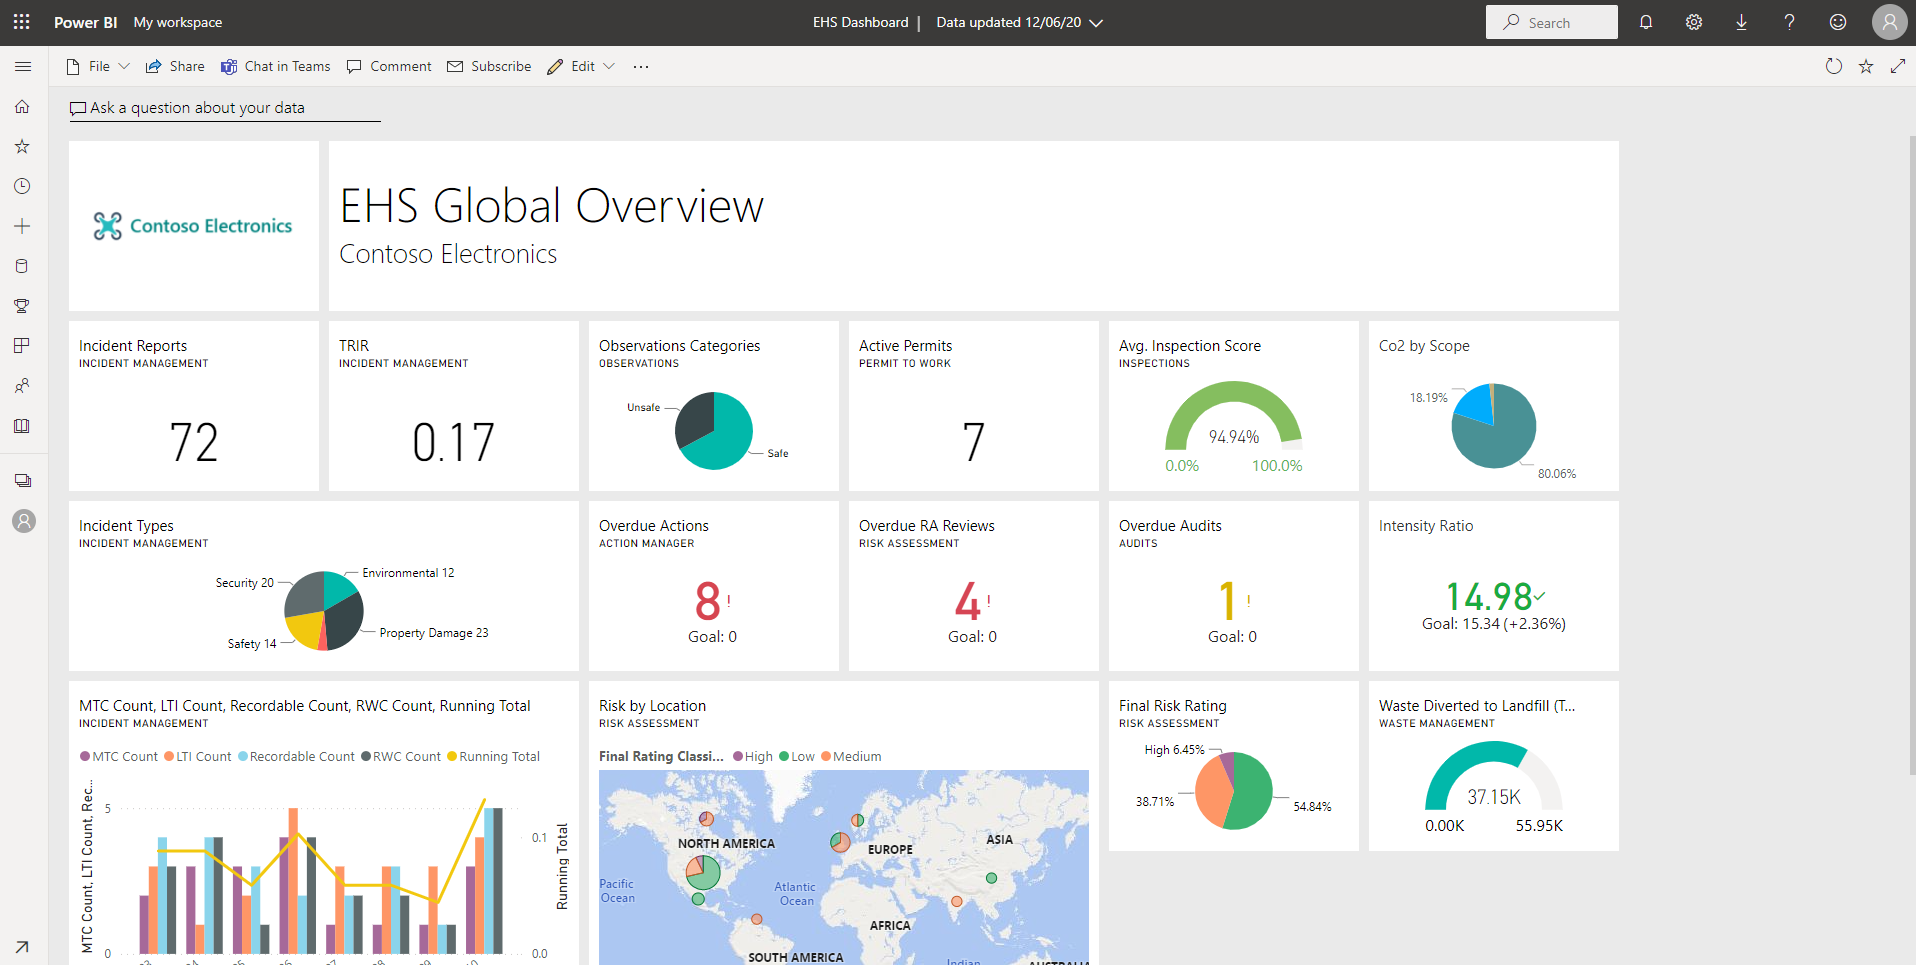 Leverage Power BI to get insights into EHS performance